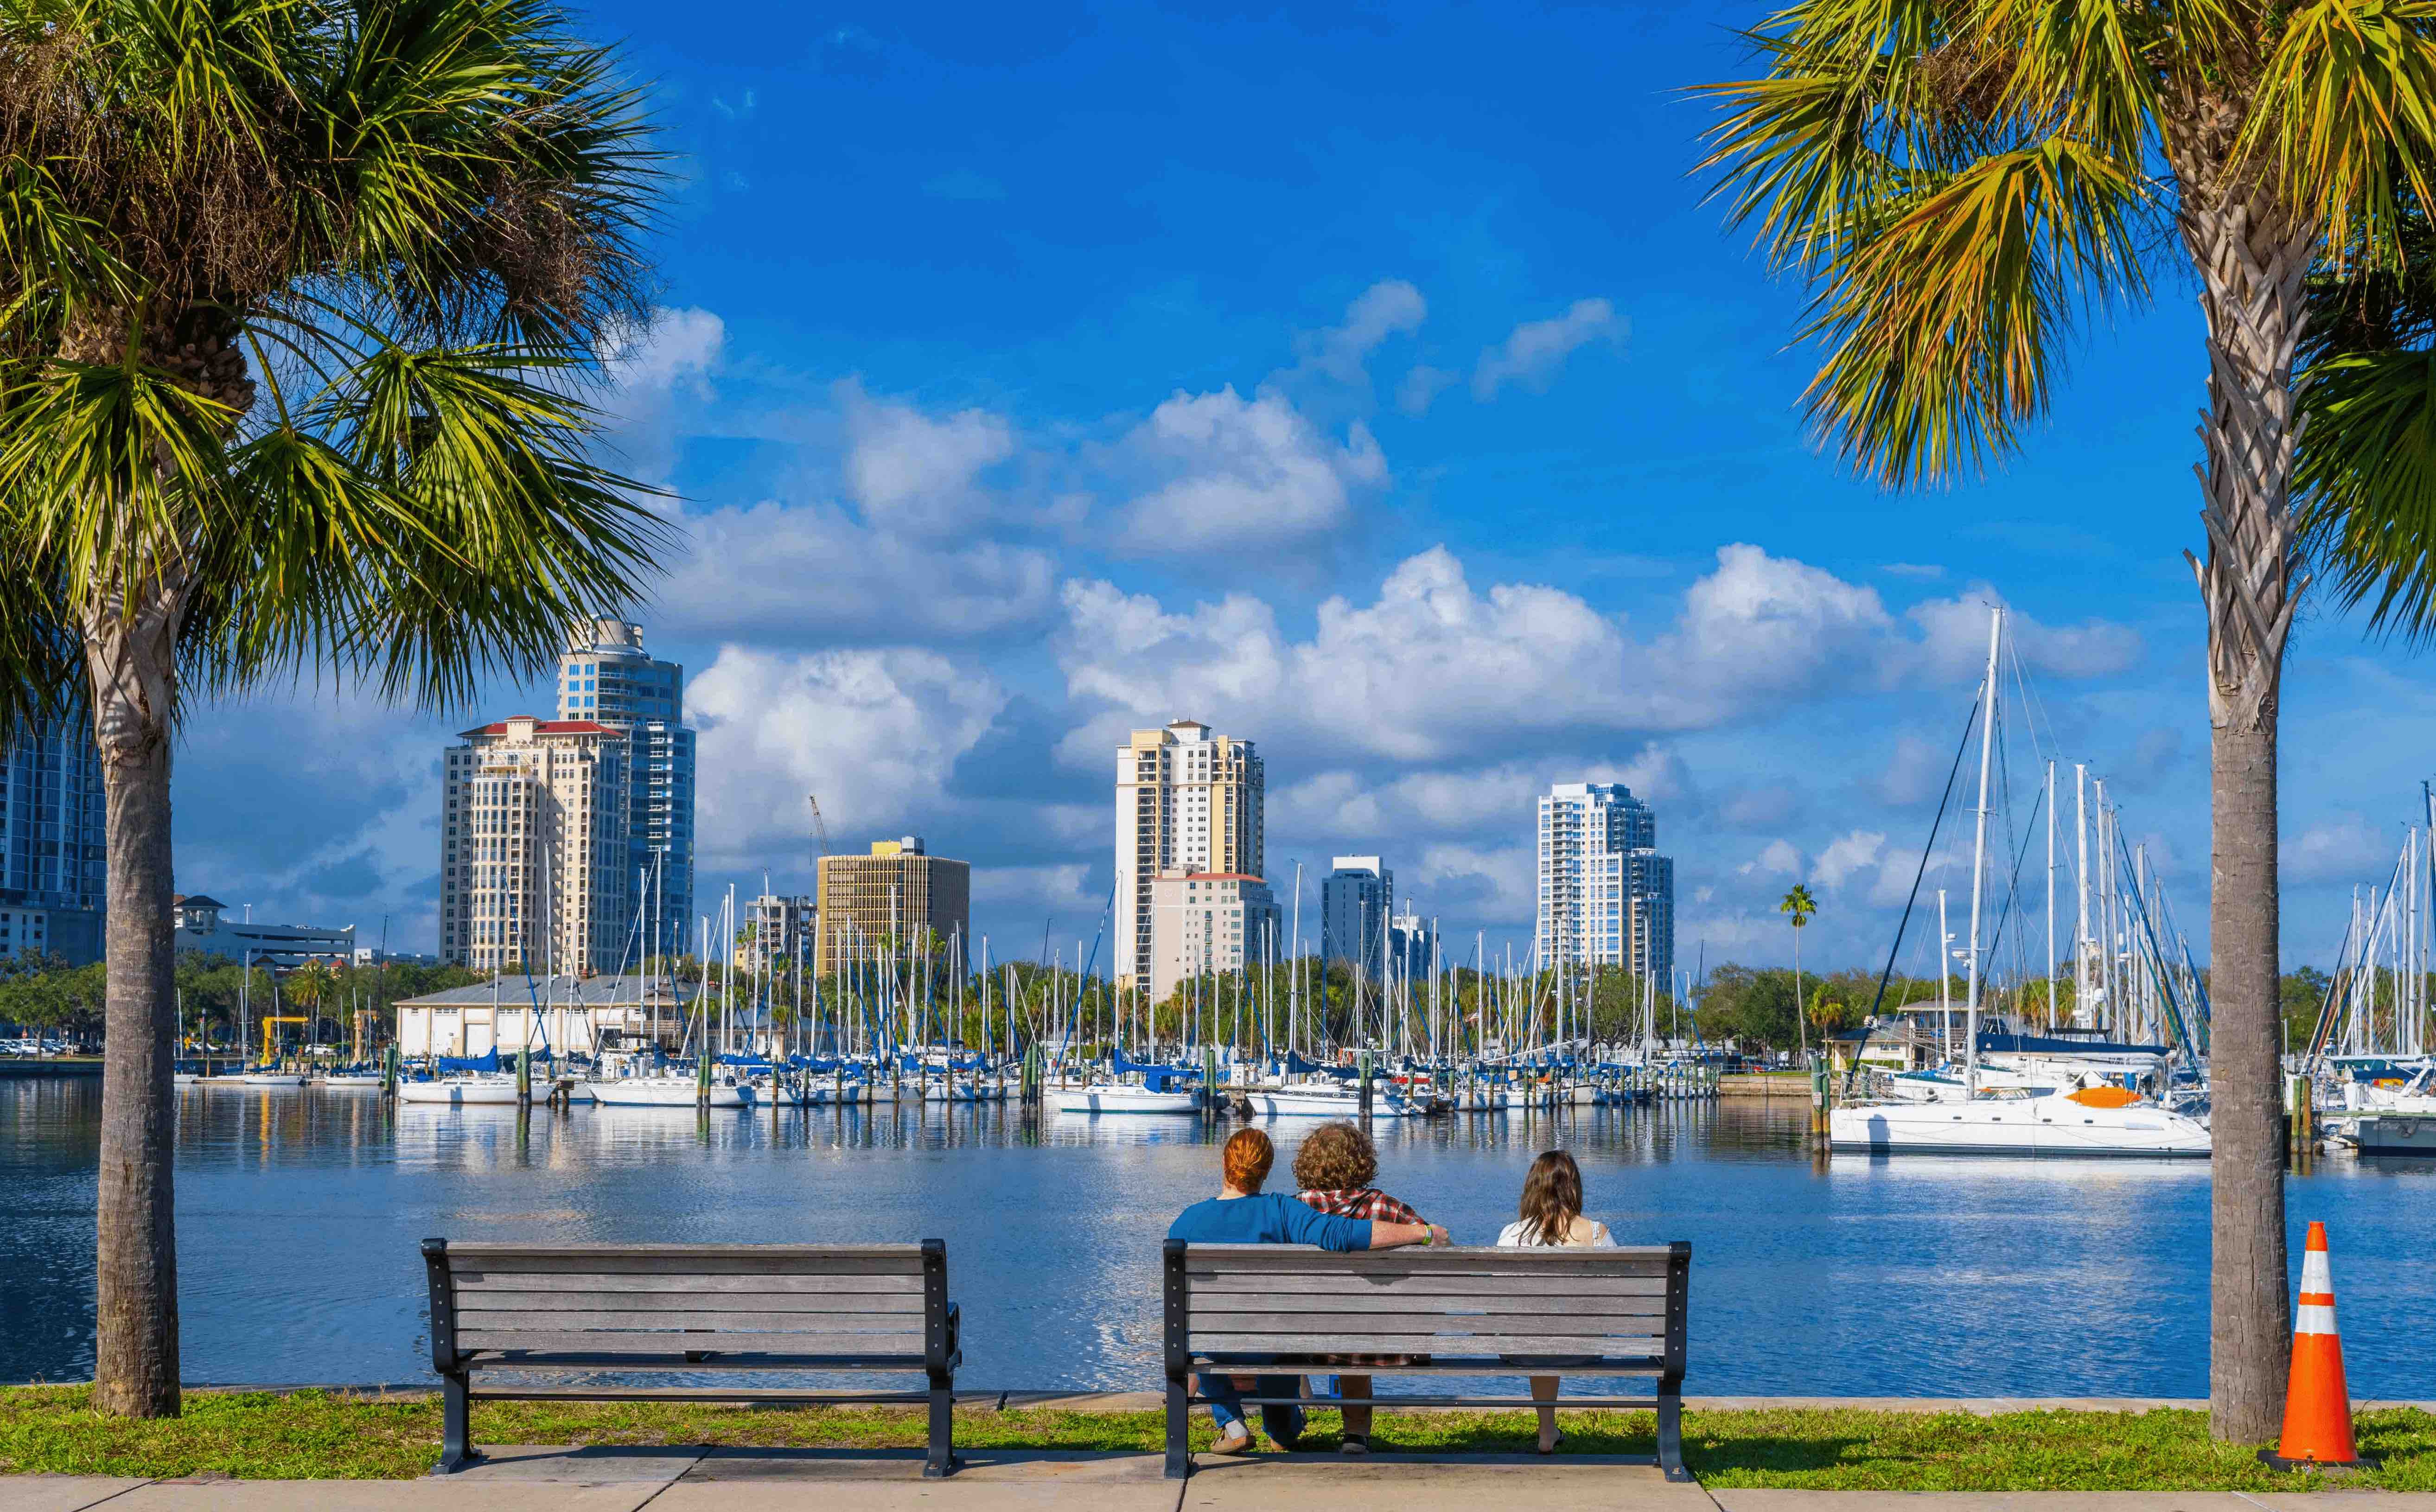 Zillow projects home values to grow 14.3 percent nationally. For Tampa Bay, 24.6 percent, making it the hottest market right now. (Credit: Getty Images) 